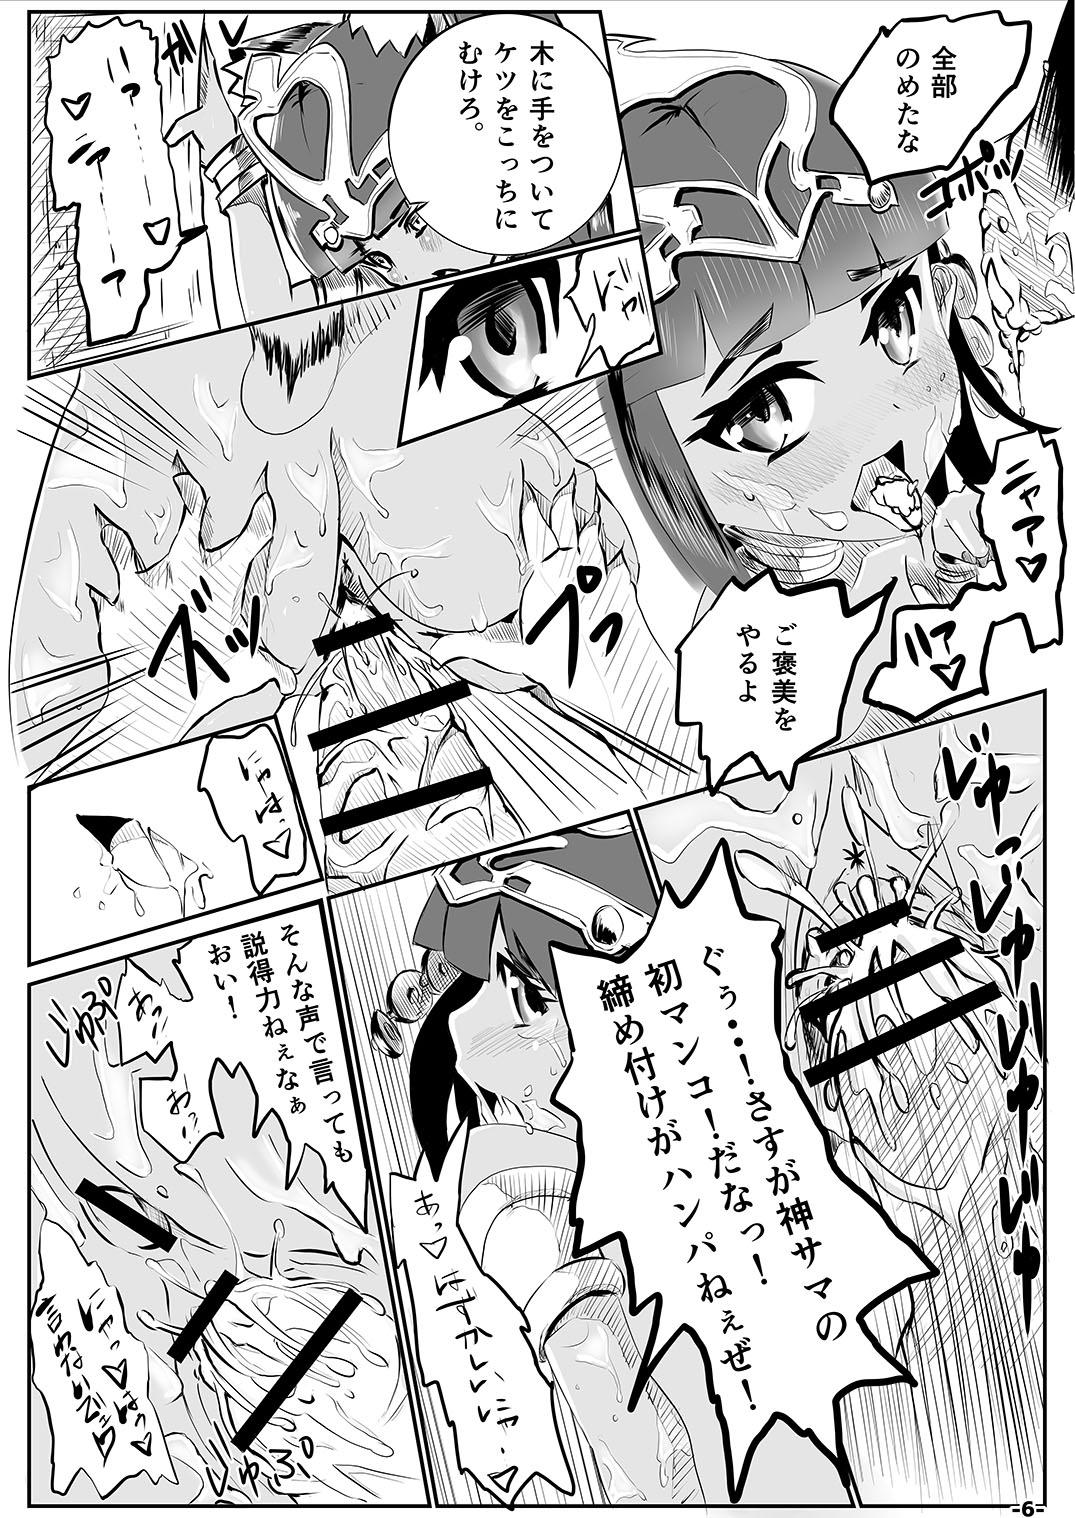 Peeing Yamiochi 2nd - Puzzle and dragons Lezbi - Page 5